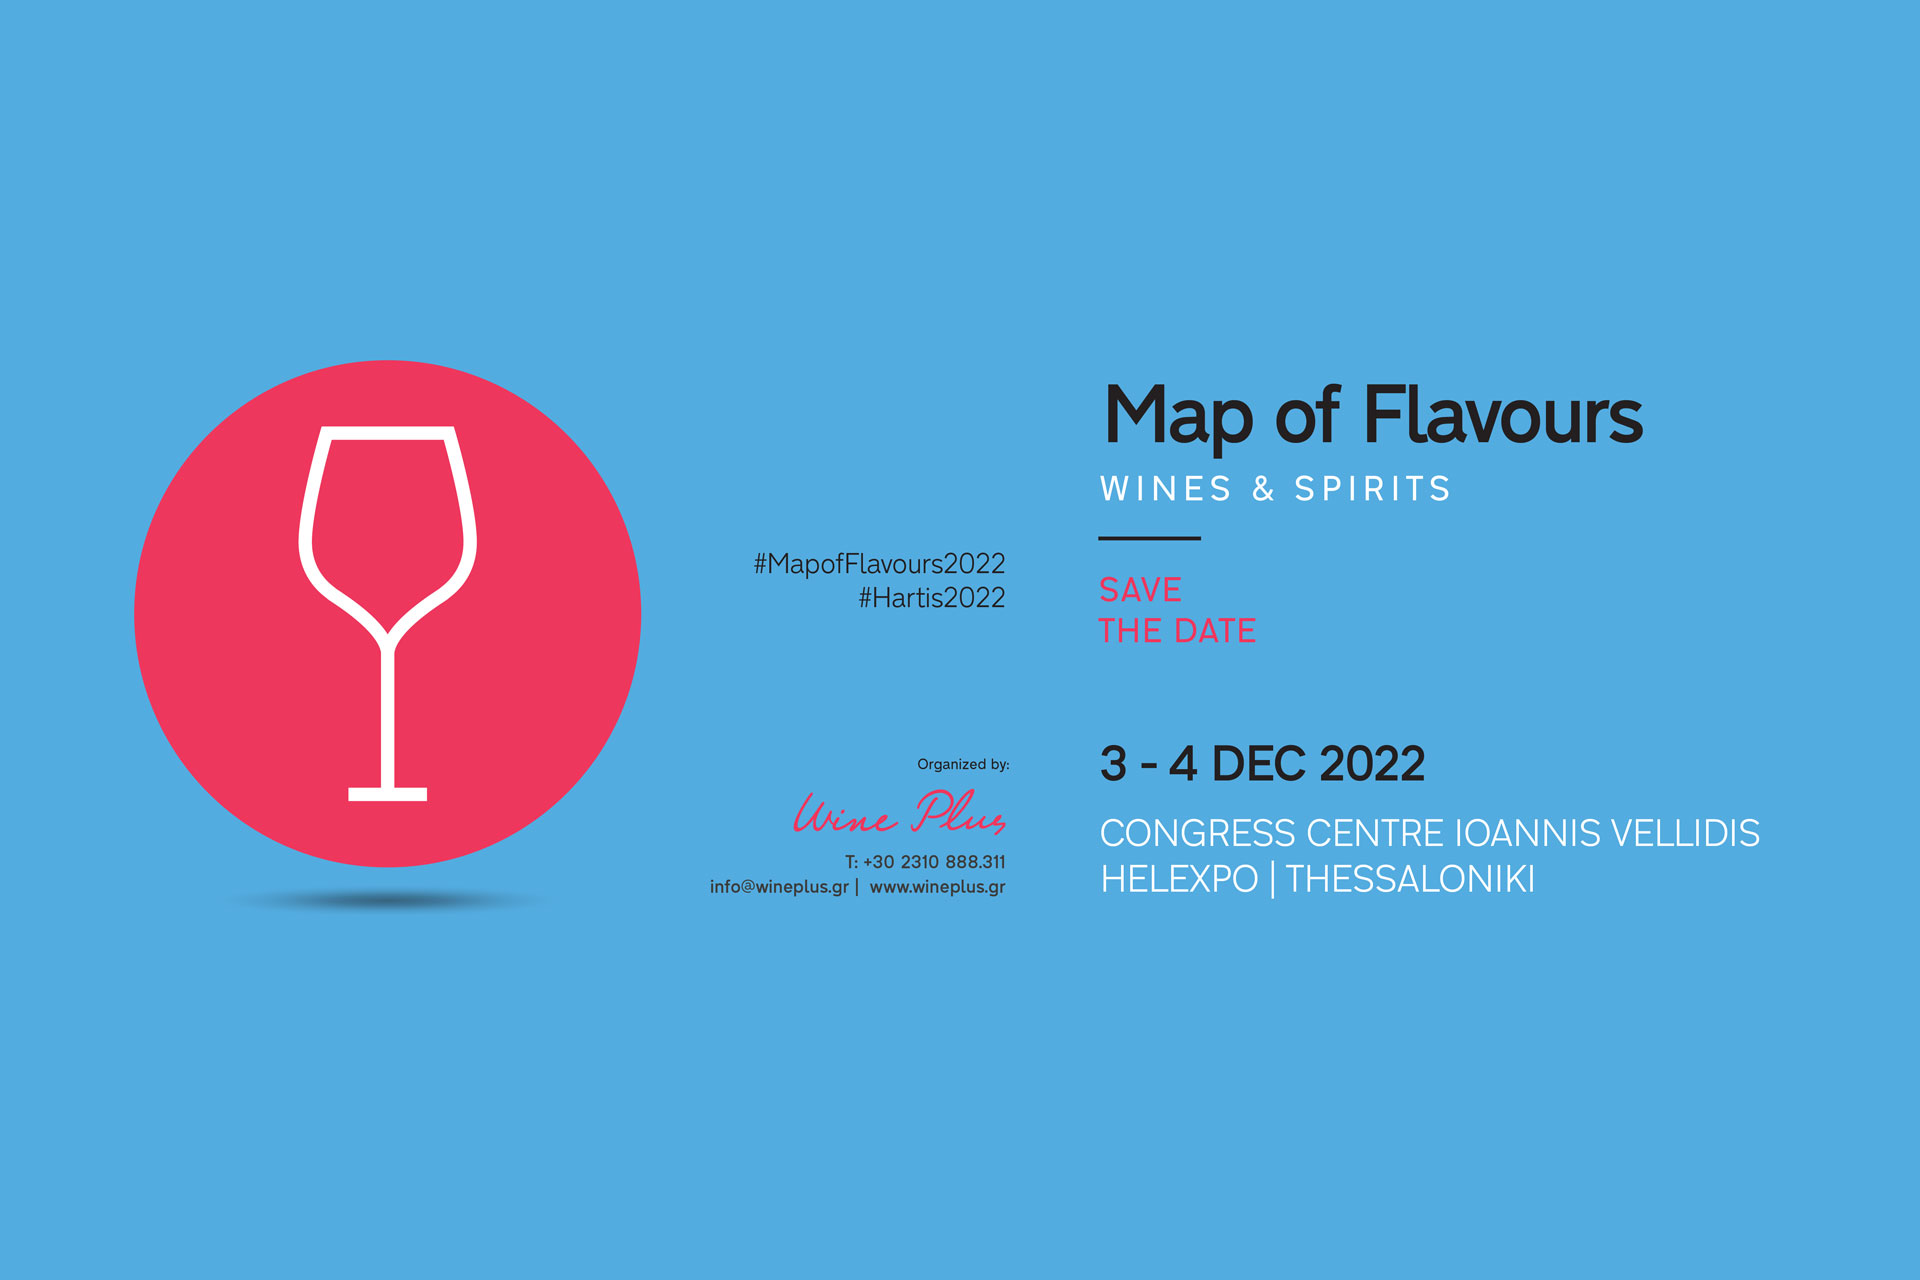 We participate in the exhibition Map of Flavours